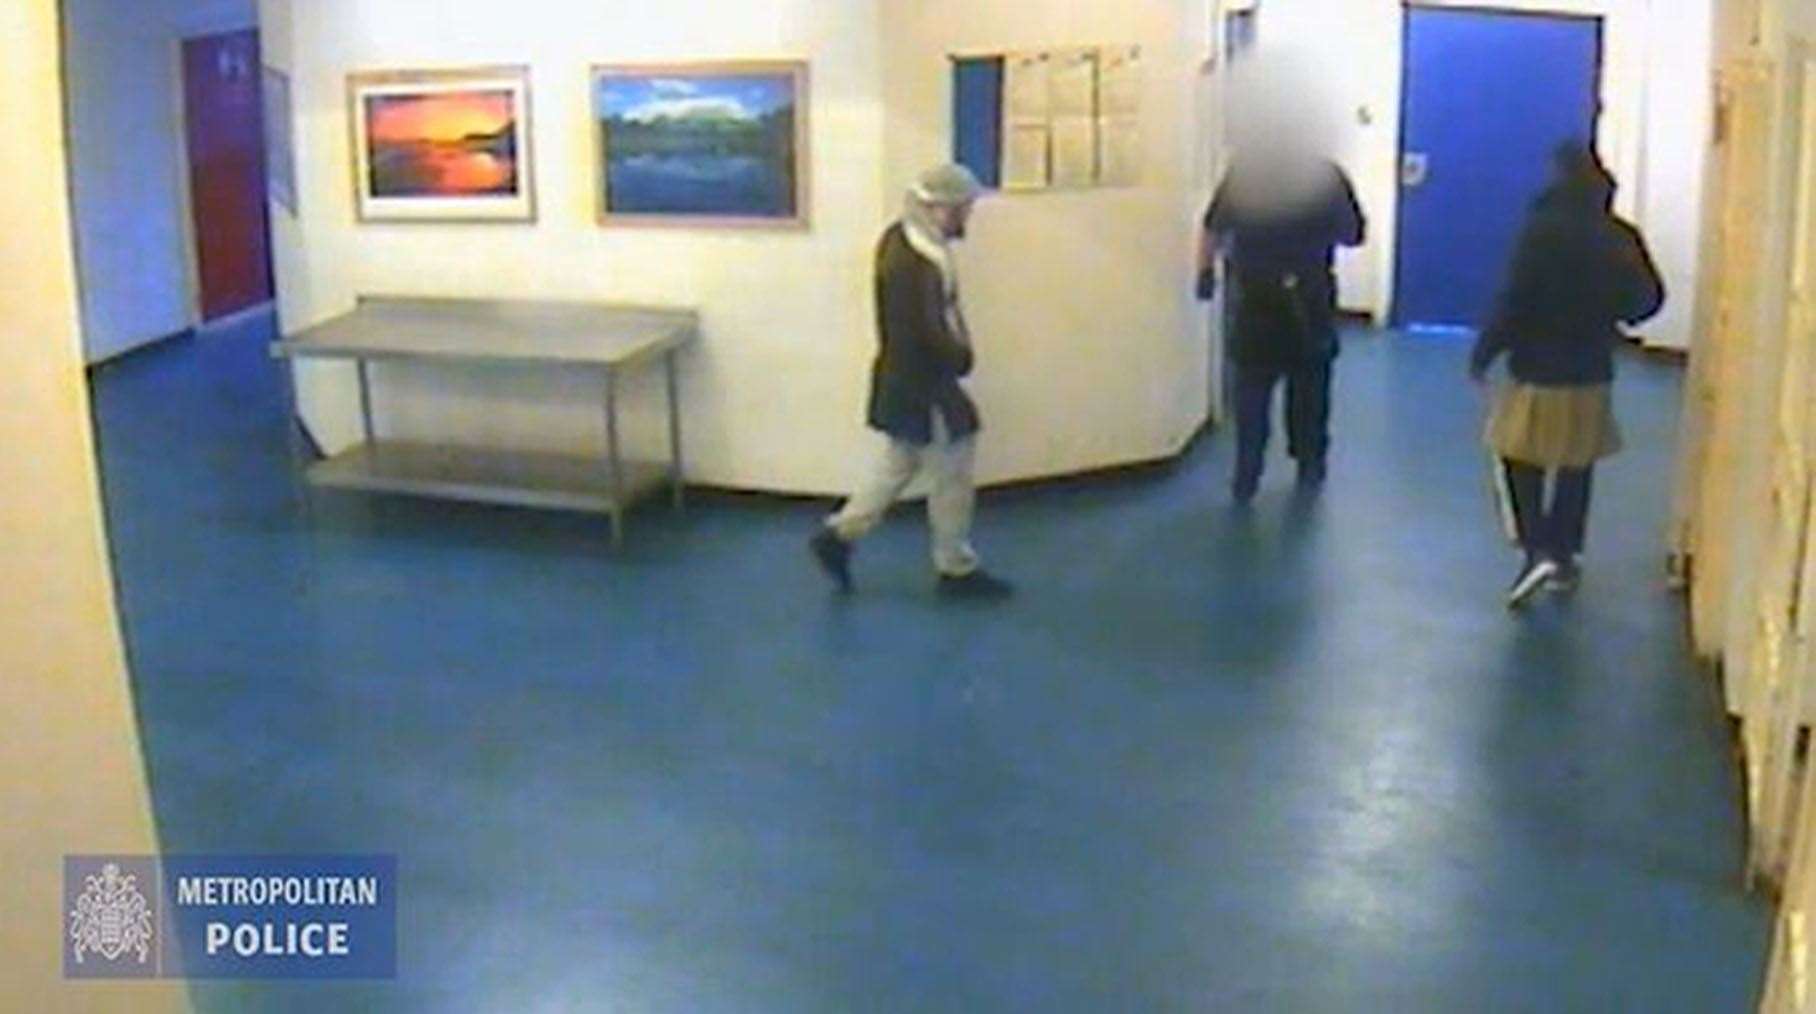 CCTV images show Brusthom Ziamani (right) and Baz Hockton (left) moments before the attack on prison guard Neil Trundle at Whitemoor jail in Cambridgeshire (Met Police/PA)